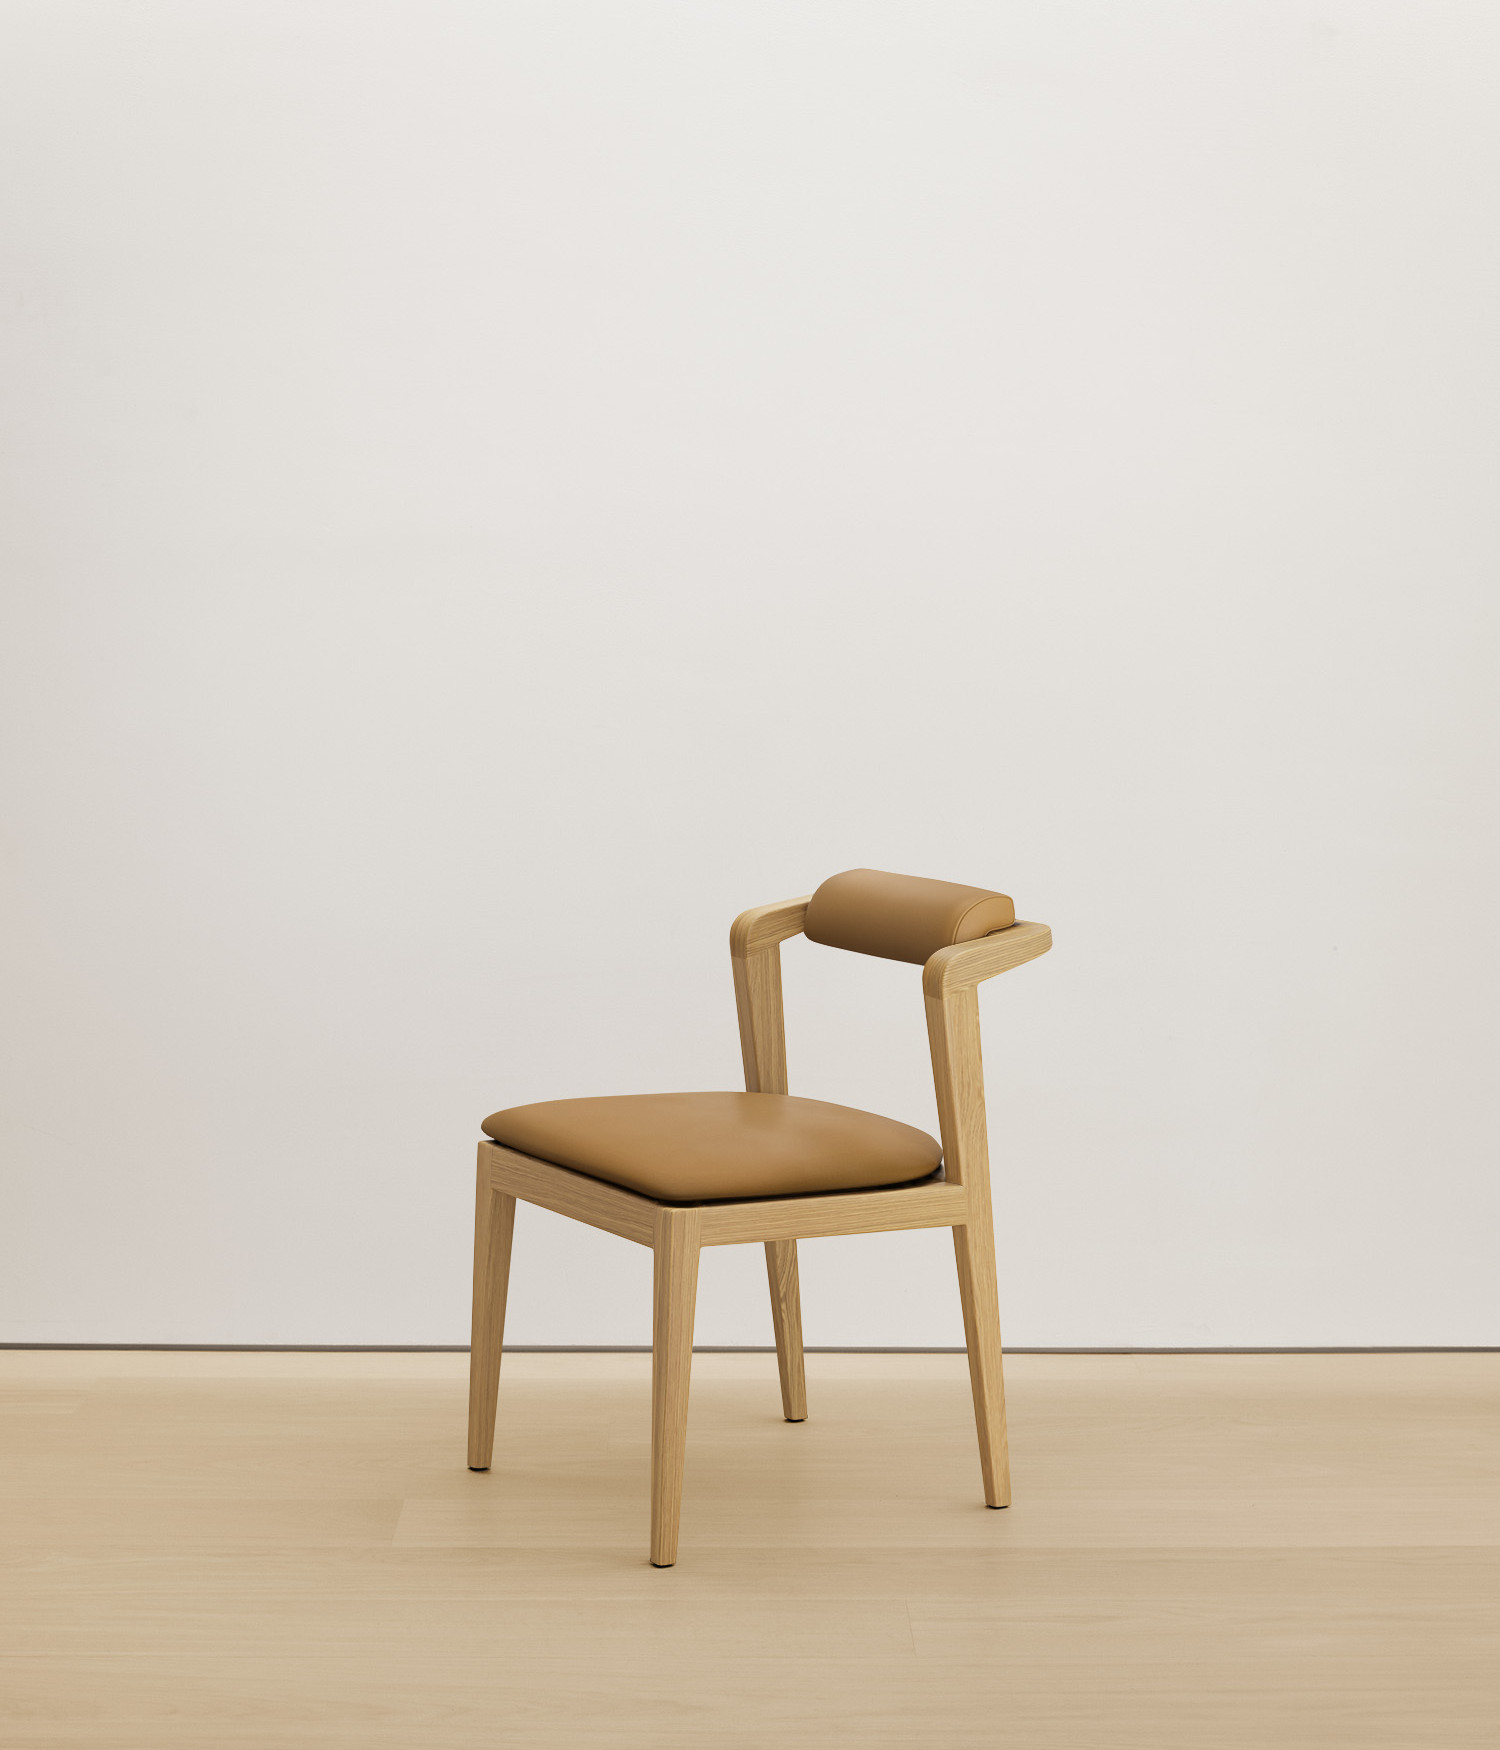  white-oak chair with tan color upholstered seat 